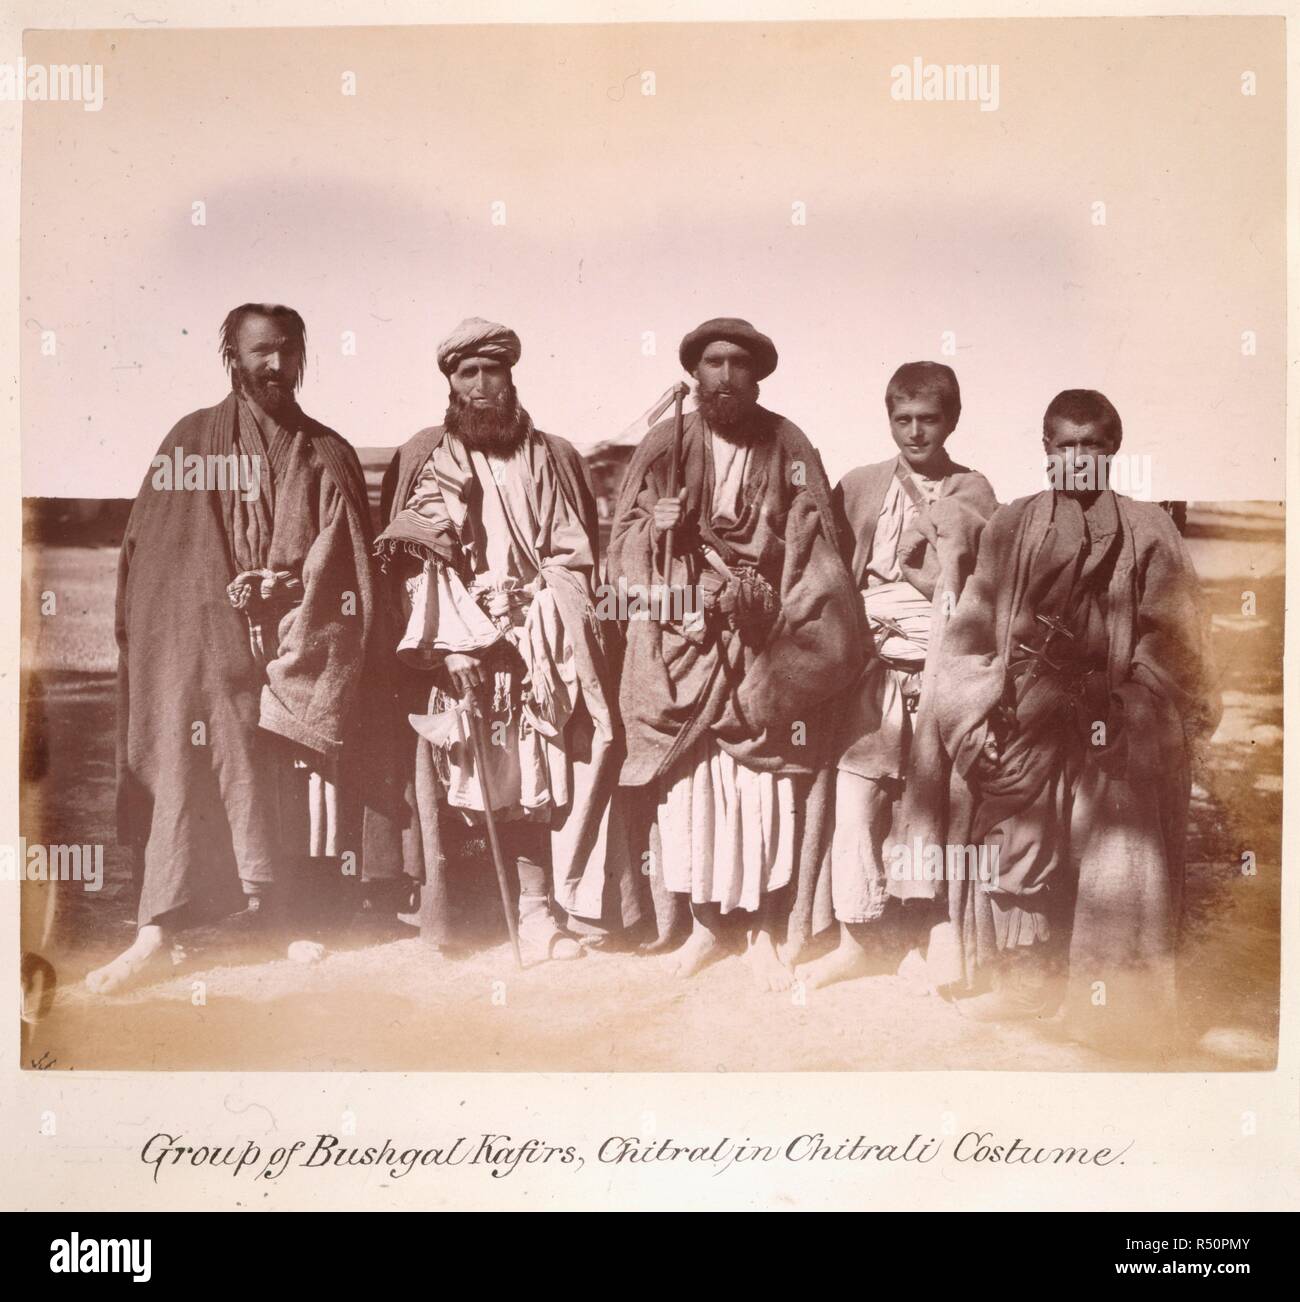 Group of Bushgal Kafirs, Chitral, in Chitrali costume. Sep-Nov 1885.  The Mission was at Chitral from 11-18 September 1885 and again from early October to mid-November. [Albumen print, 244x202mm]. Album of 'Photographs, Gilgit, Chitral, Yassin, Mastuch, &ca.' [Gilgit Mission]. The photographs are recorded as having been sent from India to the Secretary of State in August 1886., August 1886,. Source: Photo 1040/70. Author: Giles, George Michael James. Stock Photo